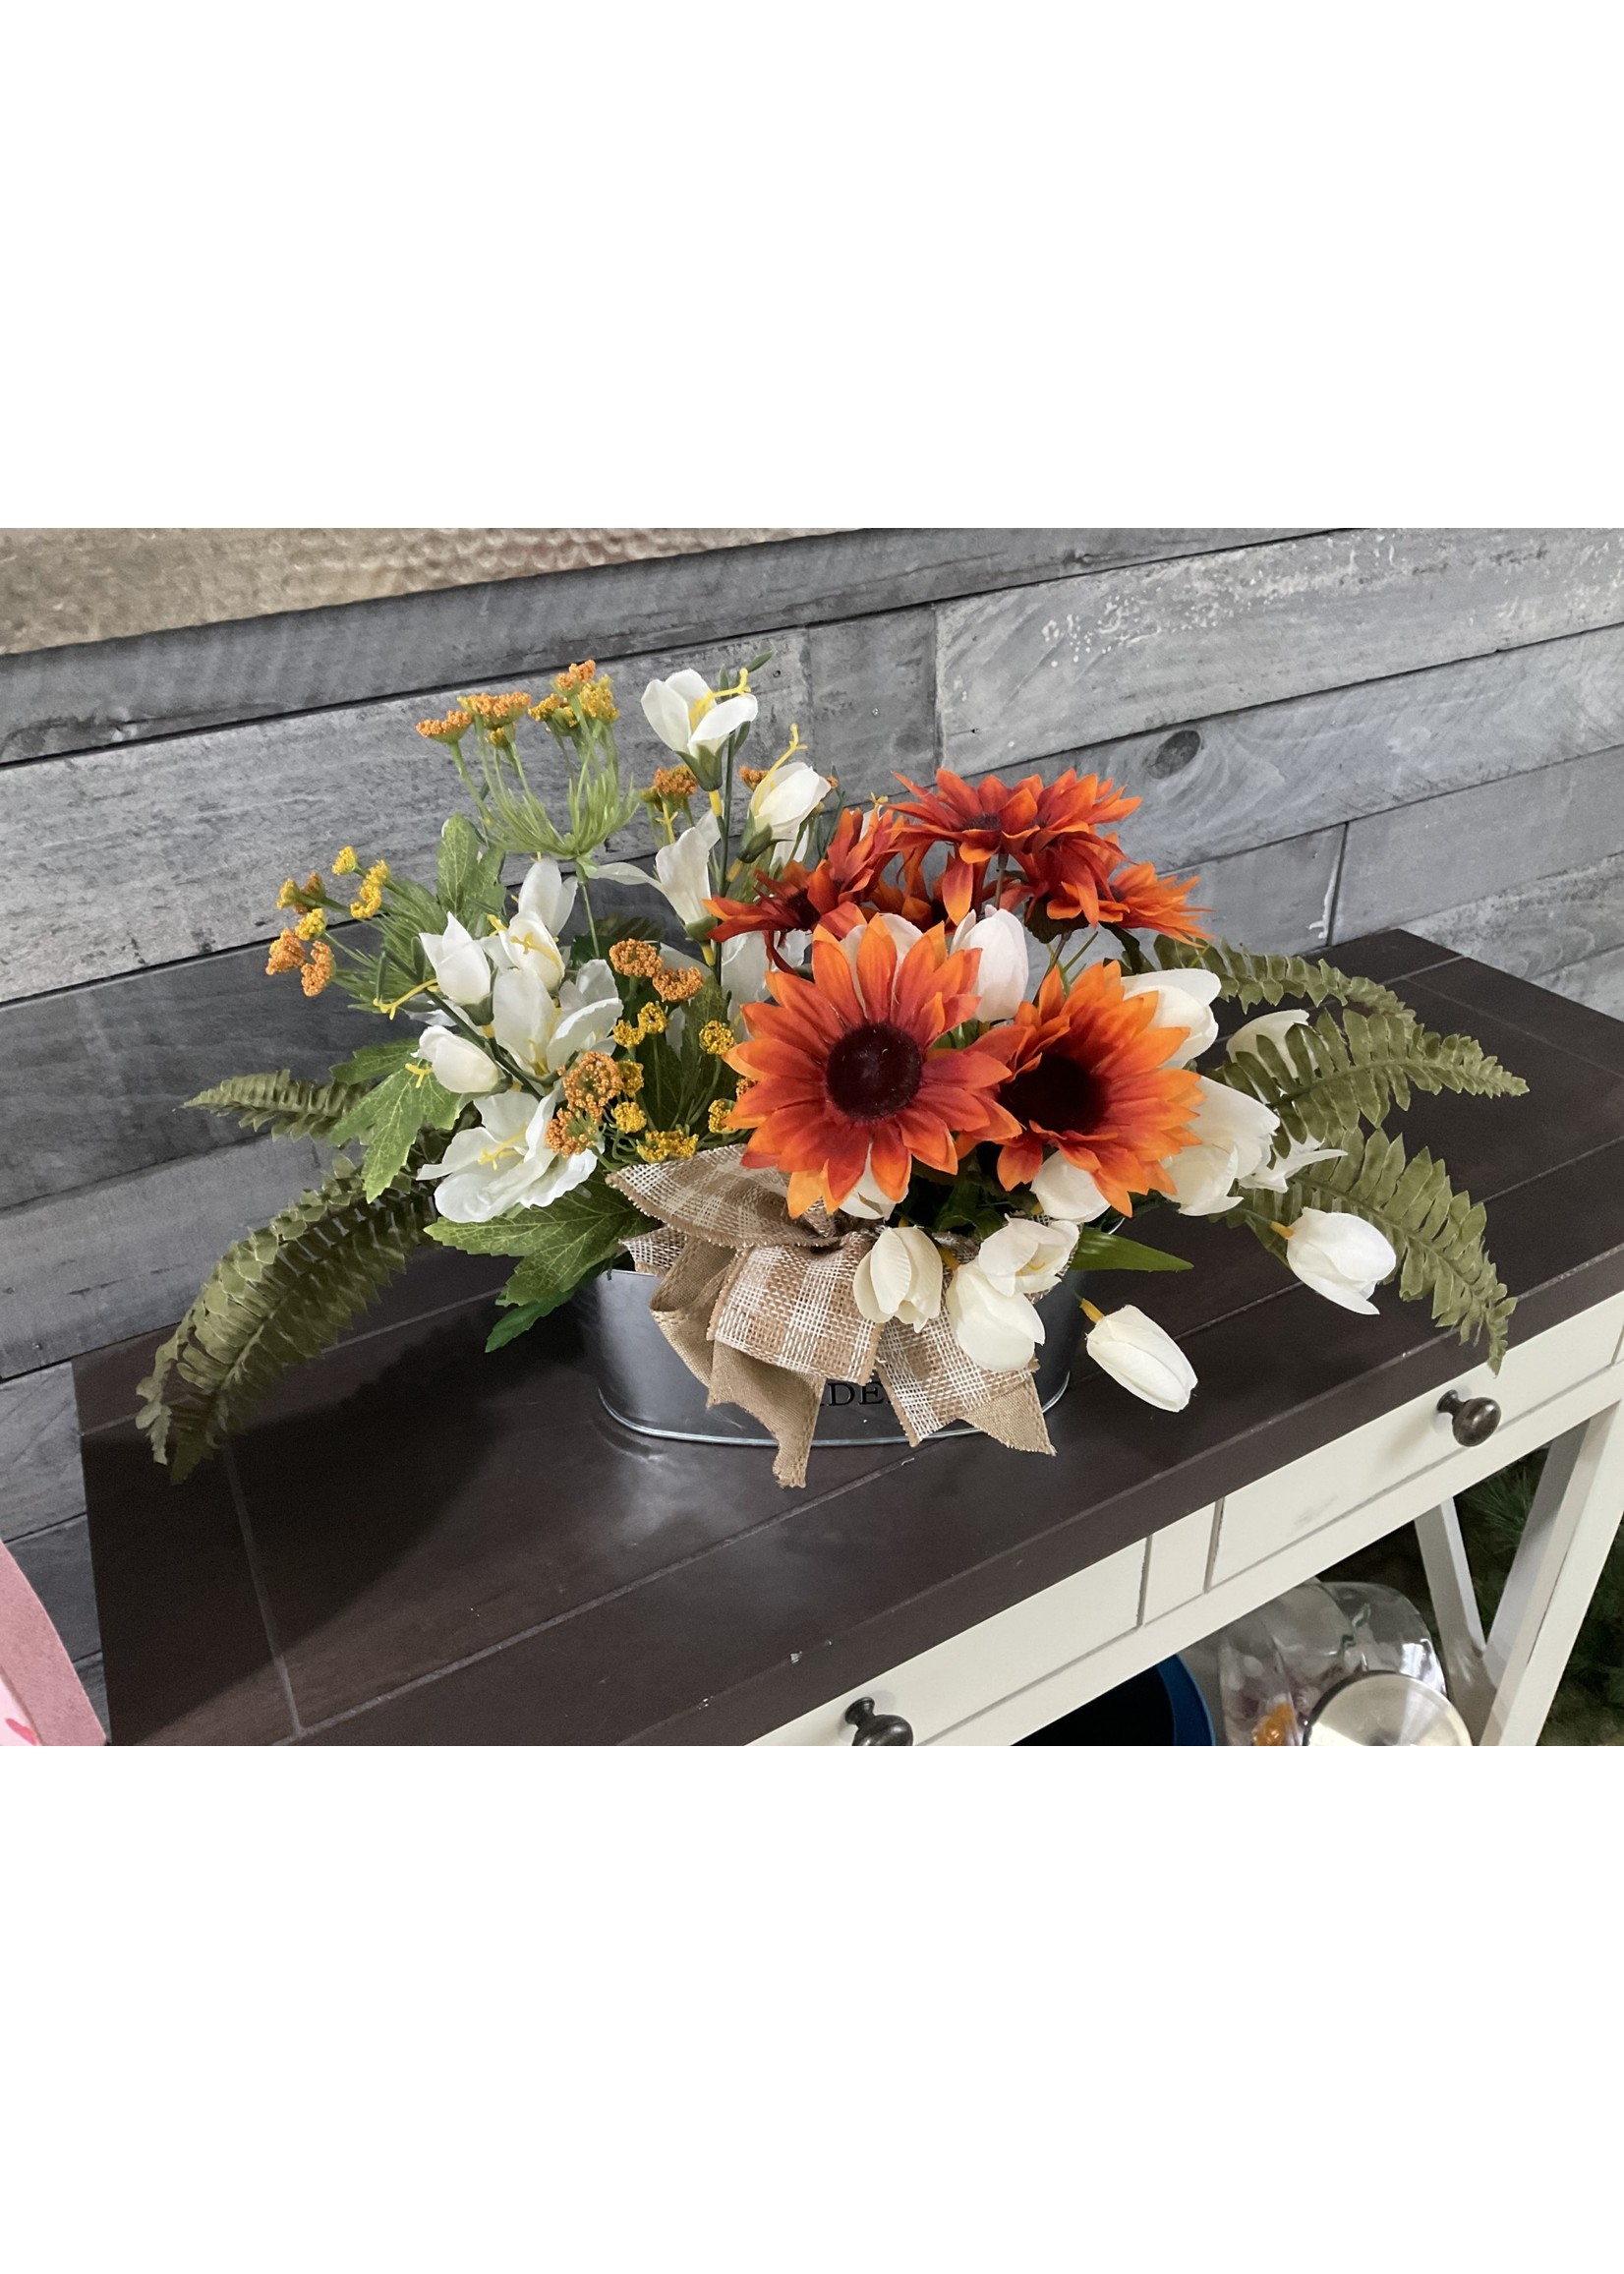 My New Favorite Thing Centerpiece Metal Container Orange, White and Yellow Flowers w/Brown Check Ribbon